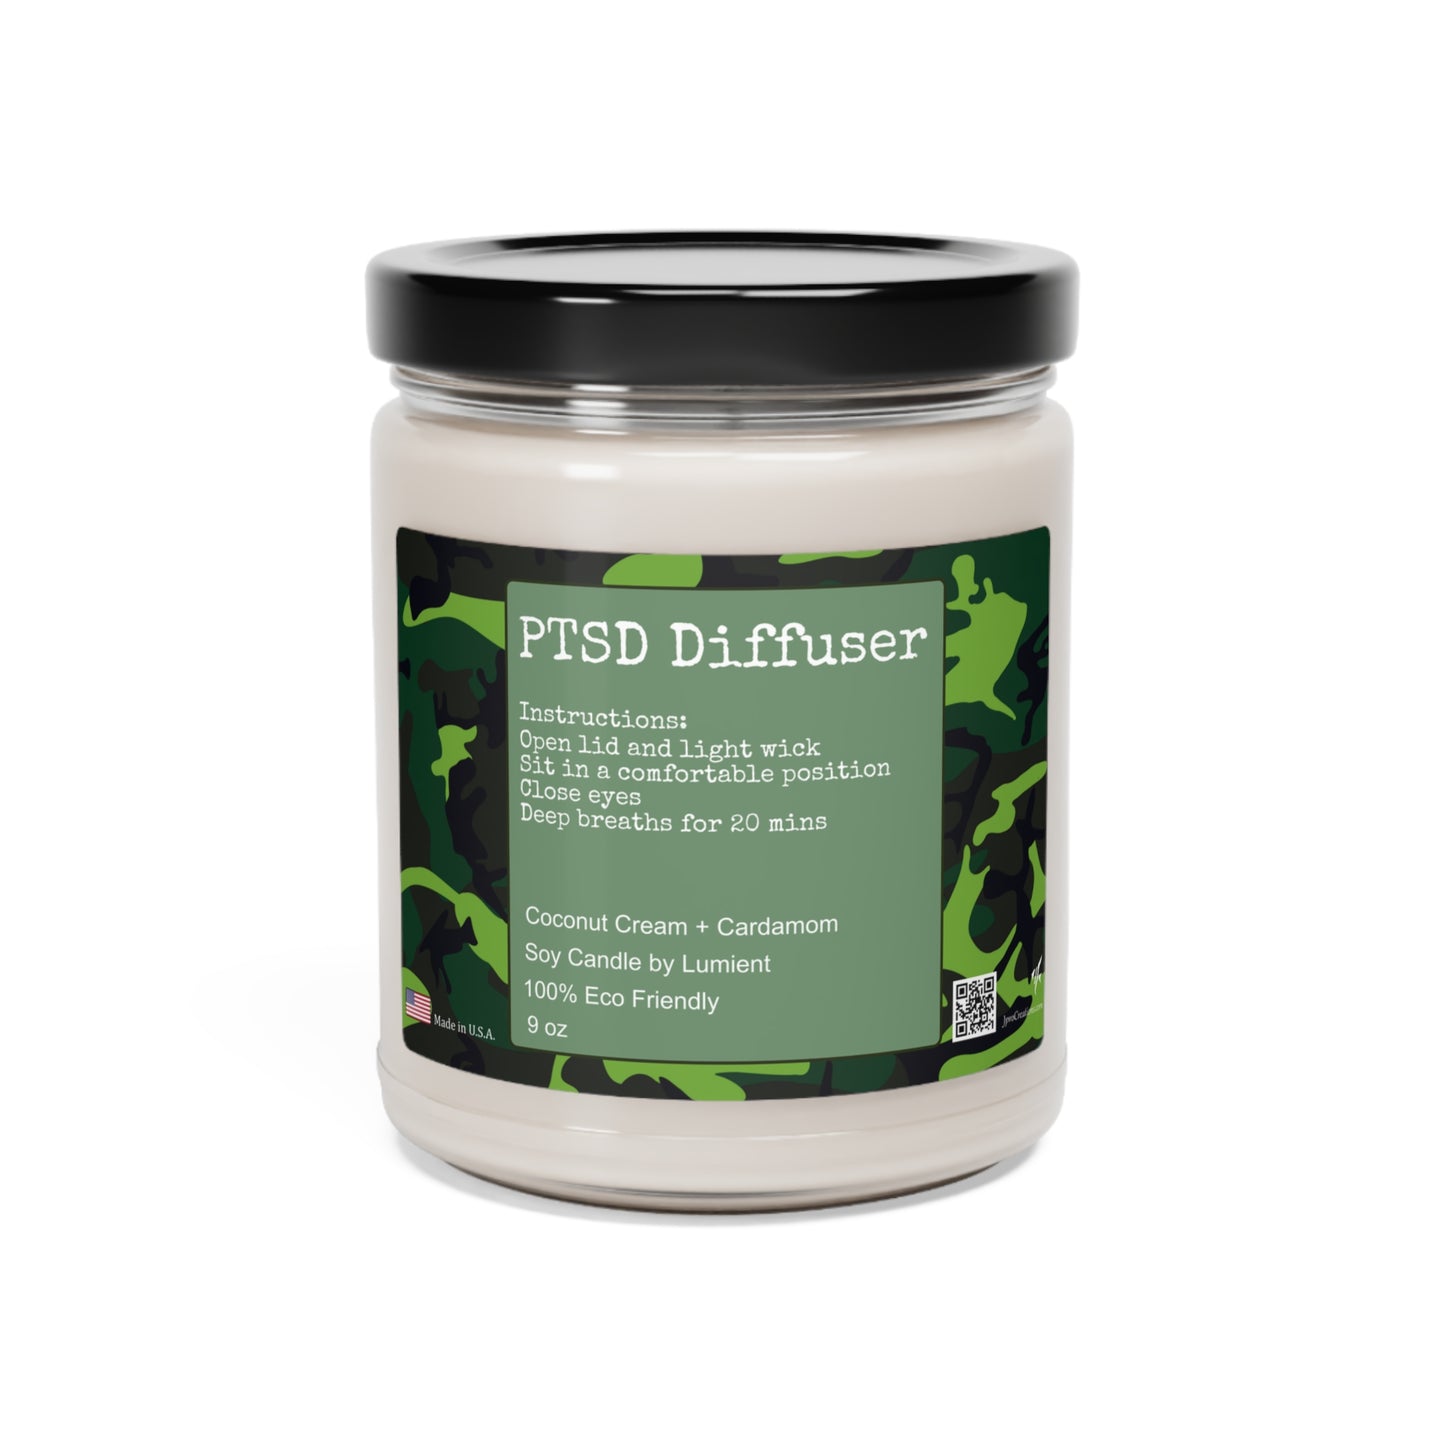 PTSD Diffuser, Scented Soy Candle